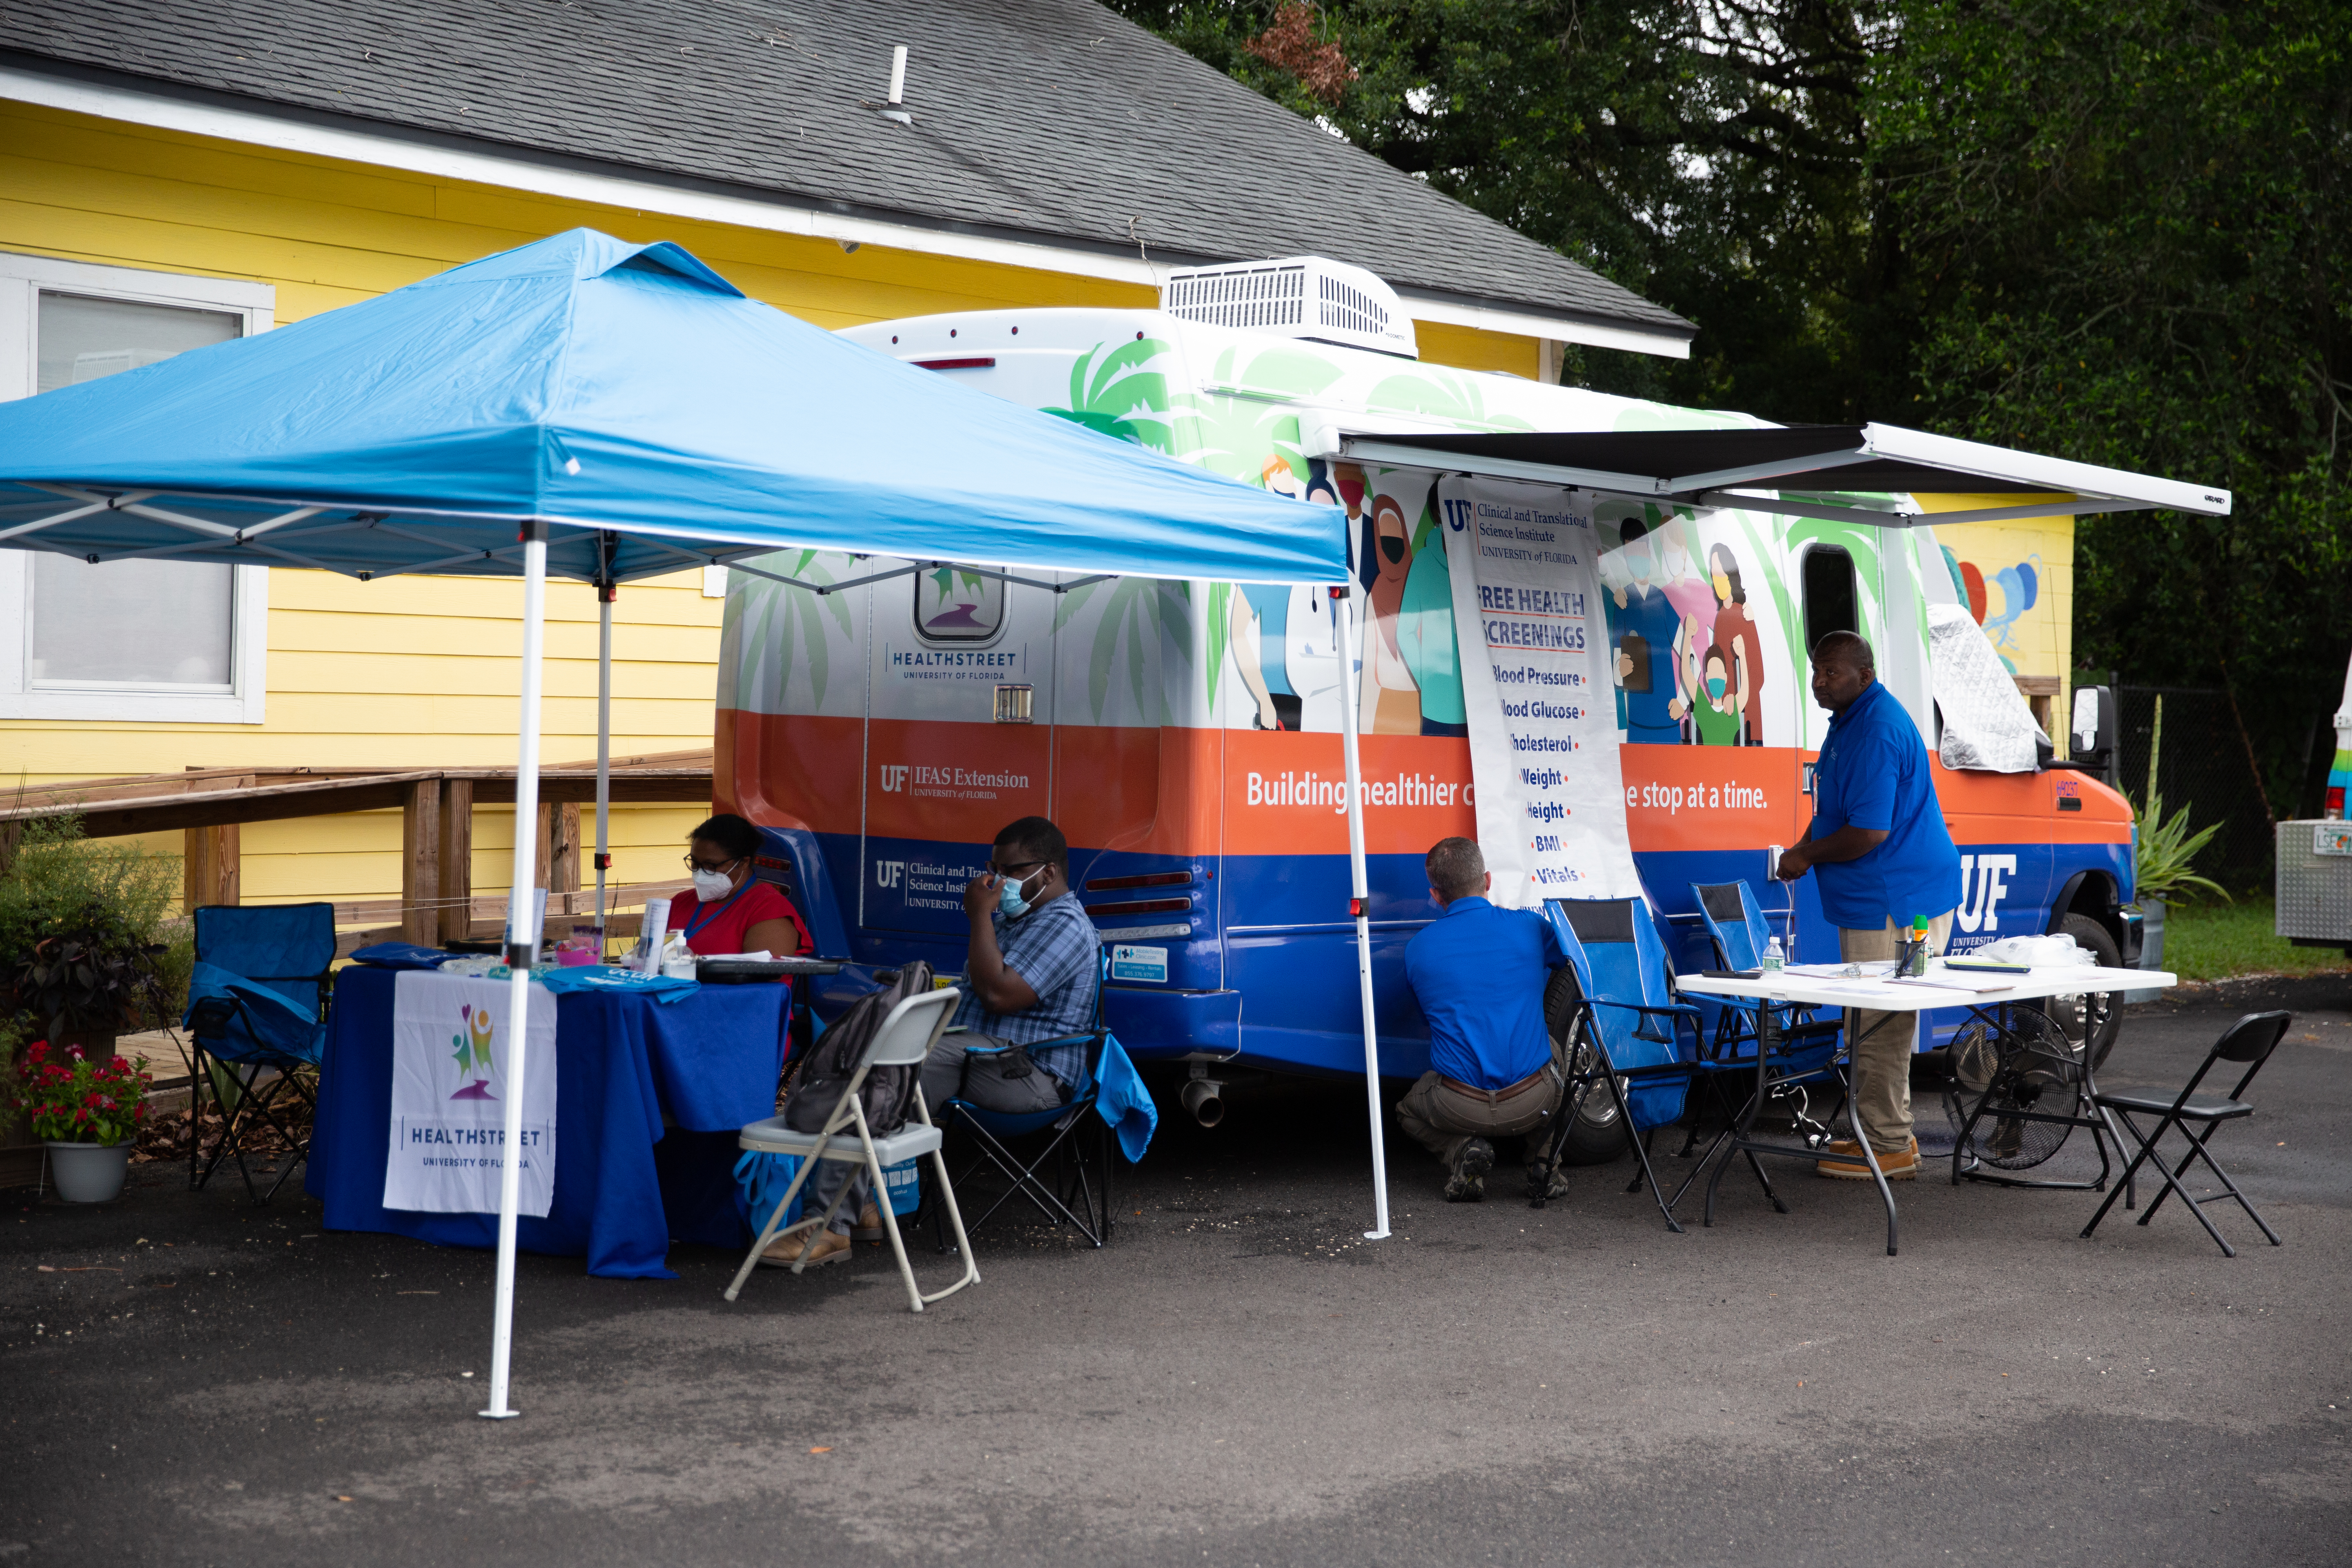 Workers staff a mobile clinic offering free health screenings.